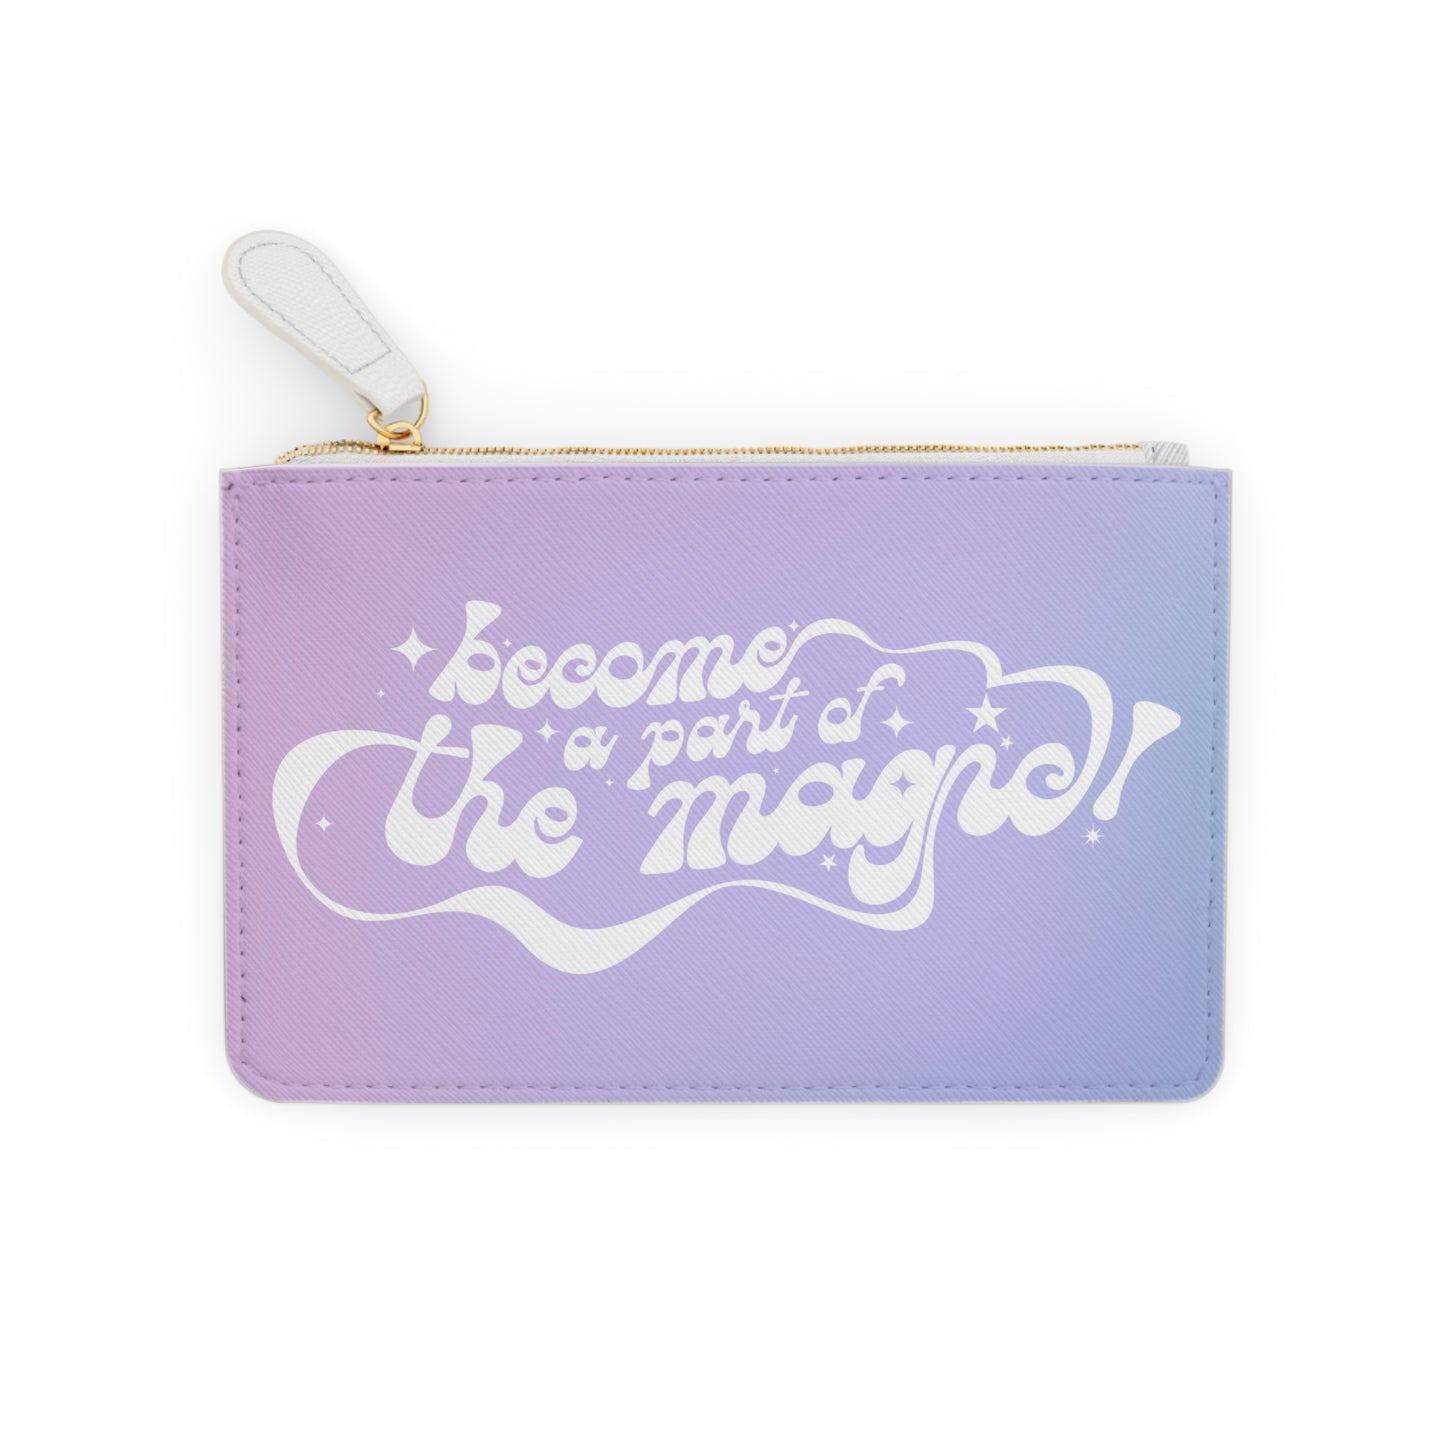 Shining Magically ✩ Sisters Clutch Bag